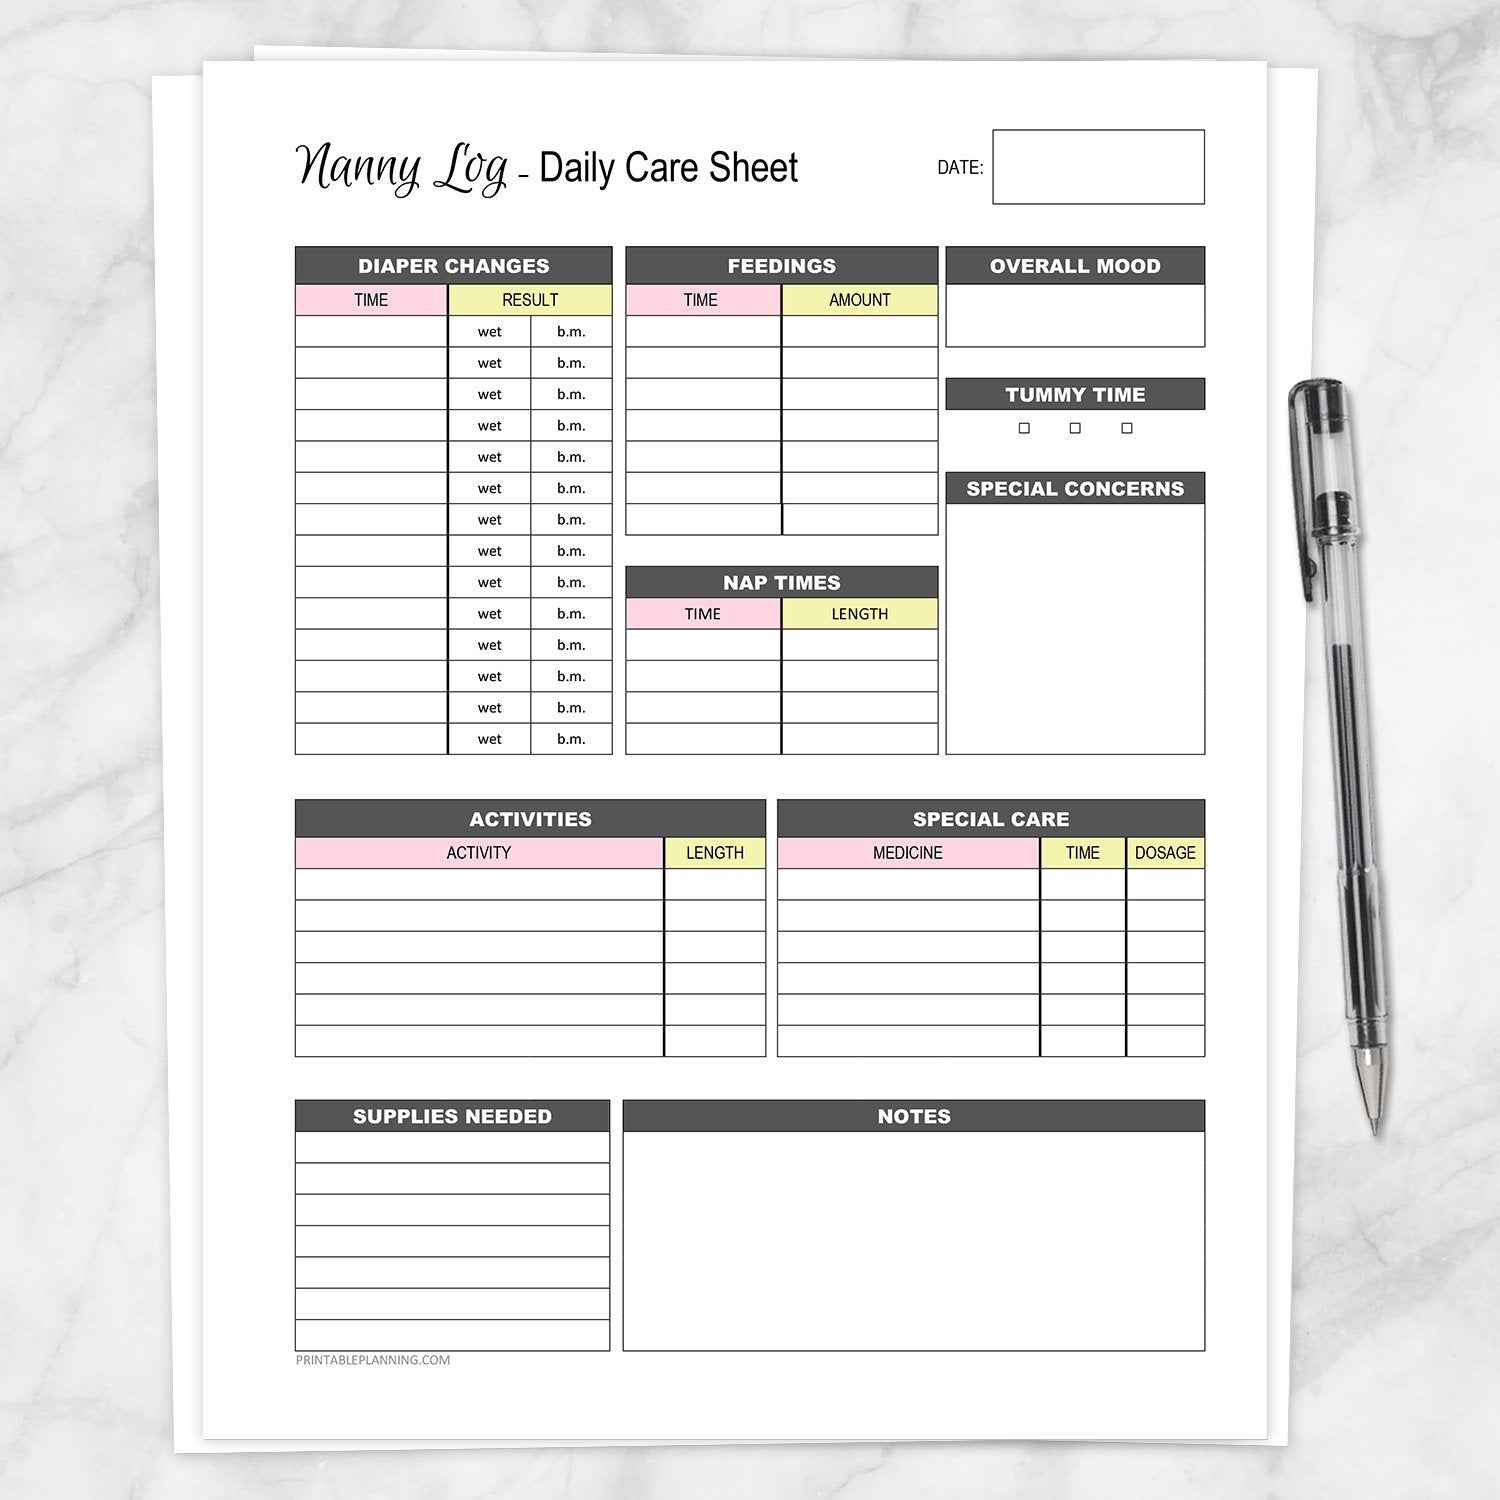 Printable Nanny Log - Daily Infant Care Sheet - Pink and Yellow, at Printable Planning